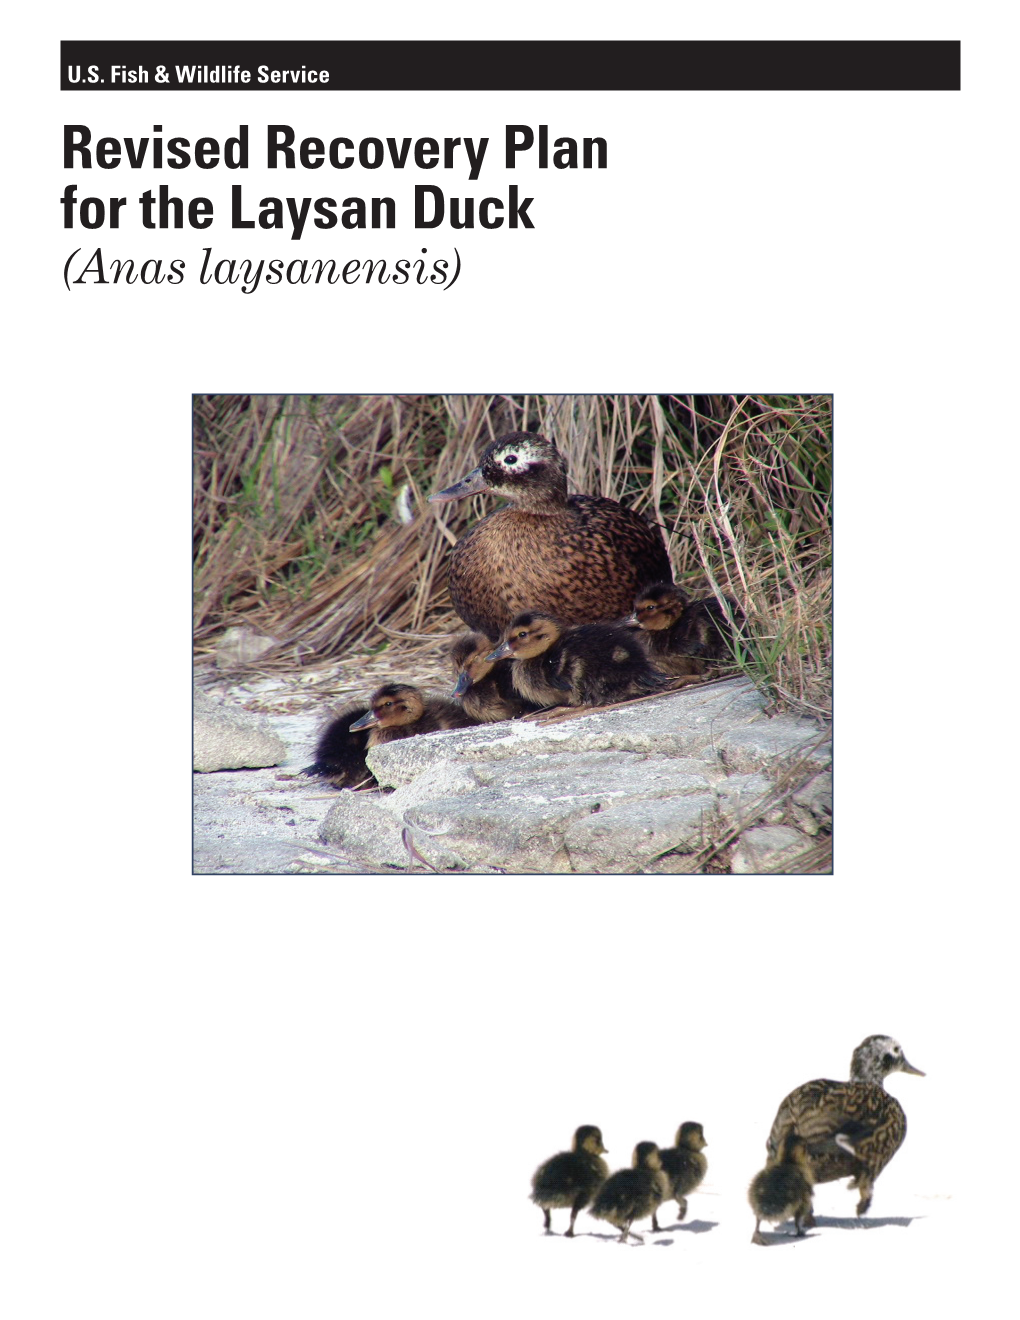 Revised Recovery Plan for the Laysan Duck